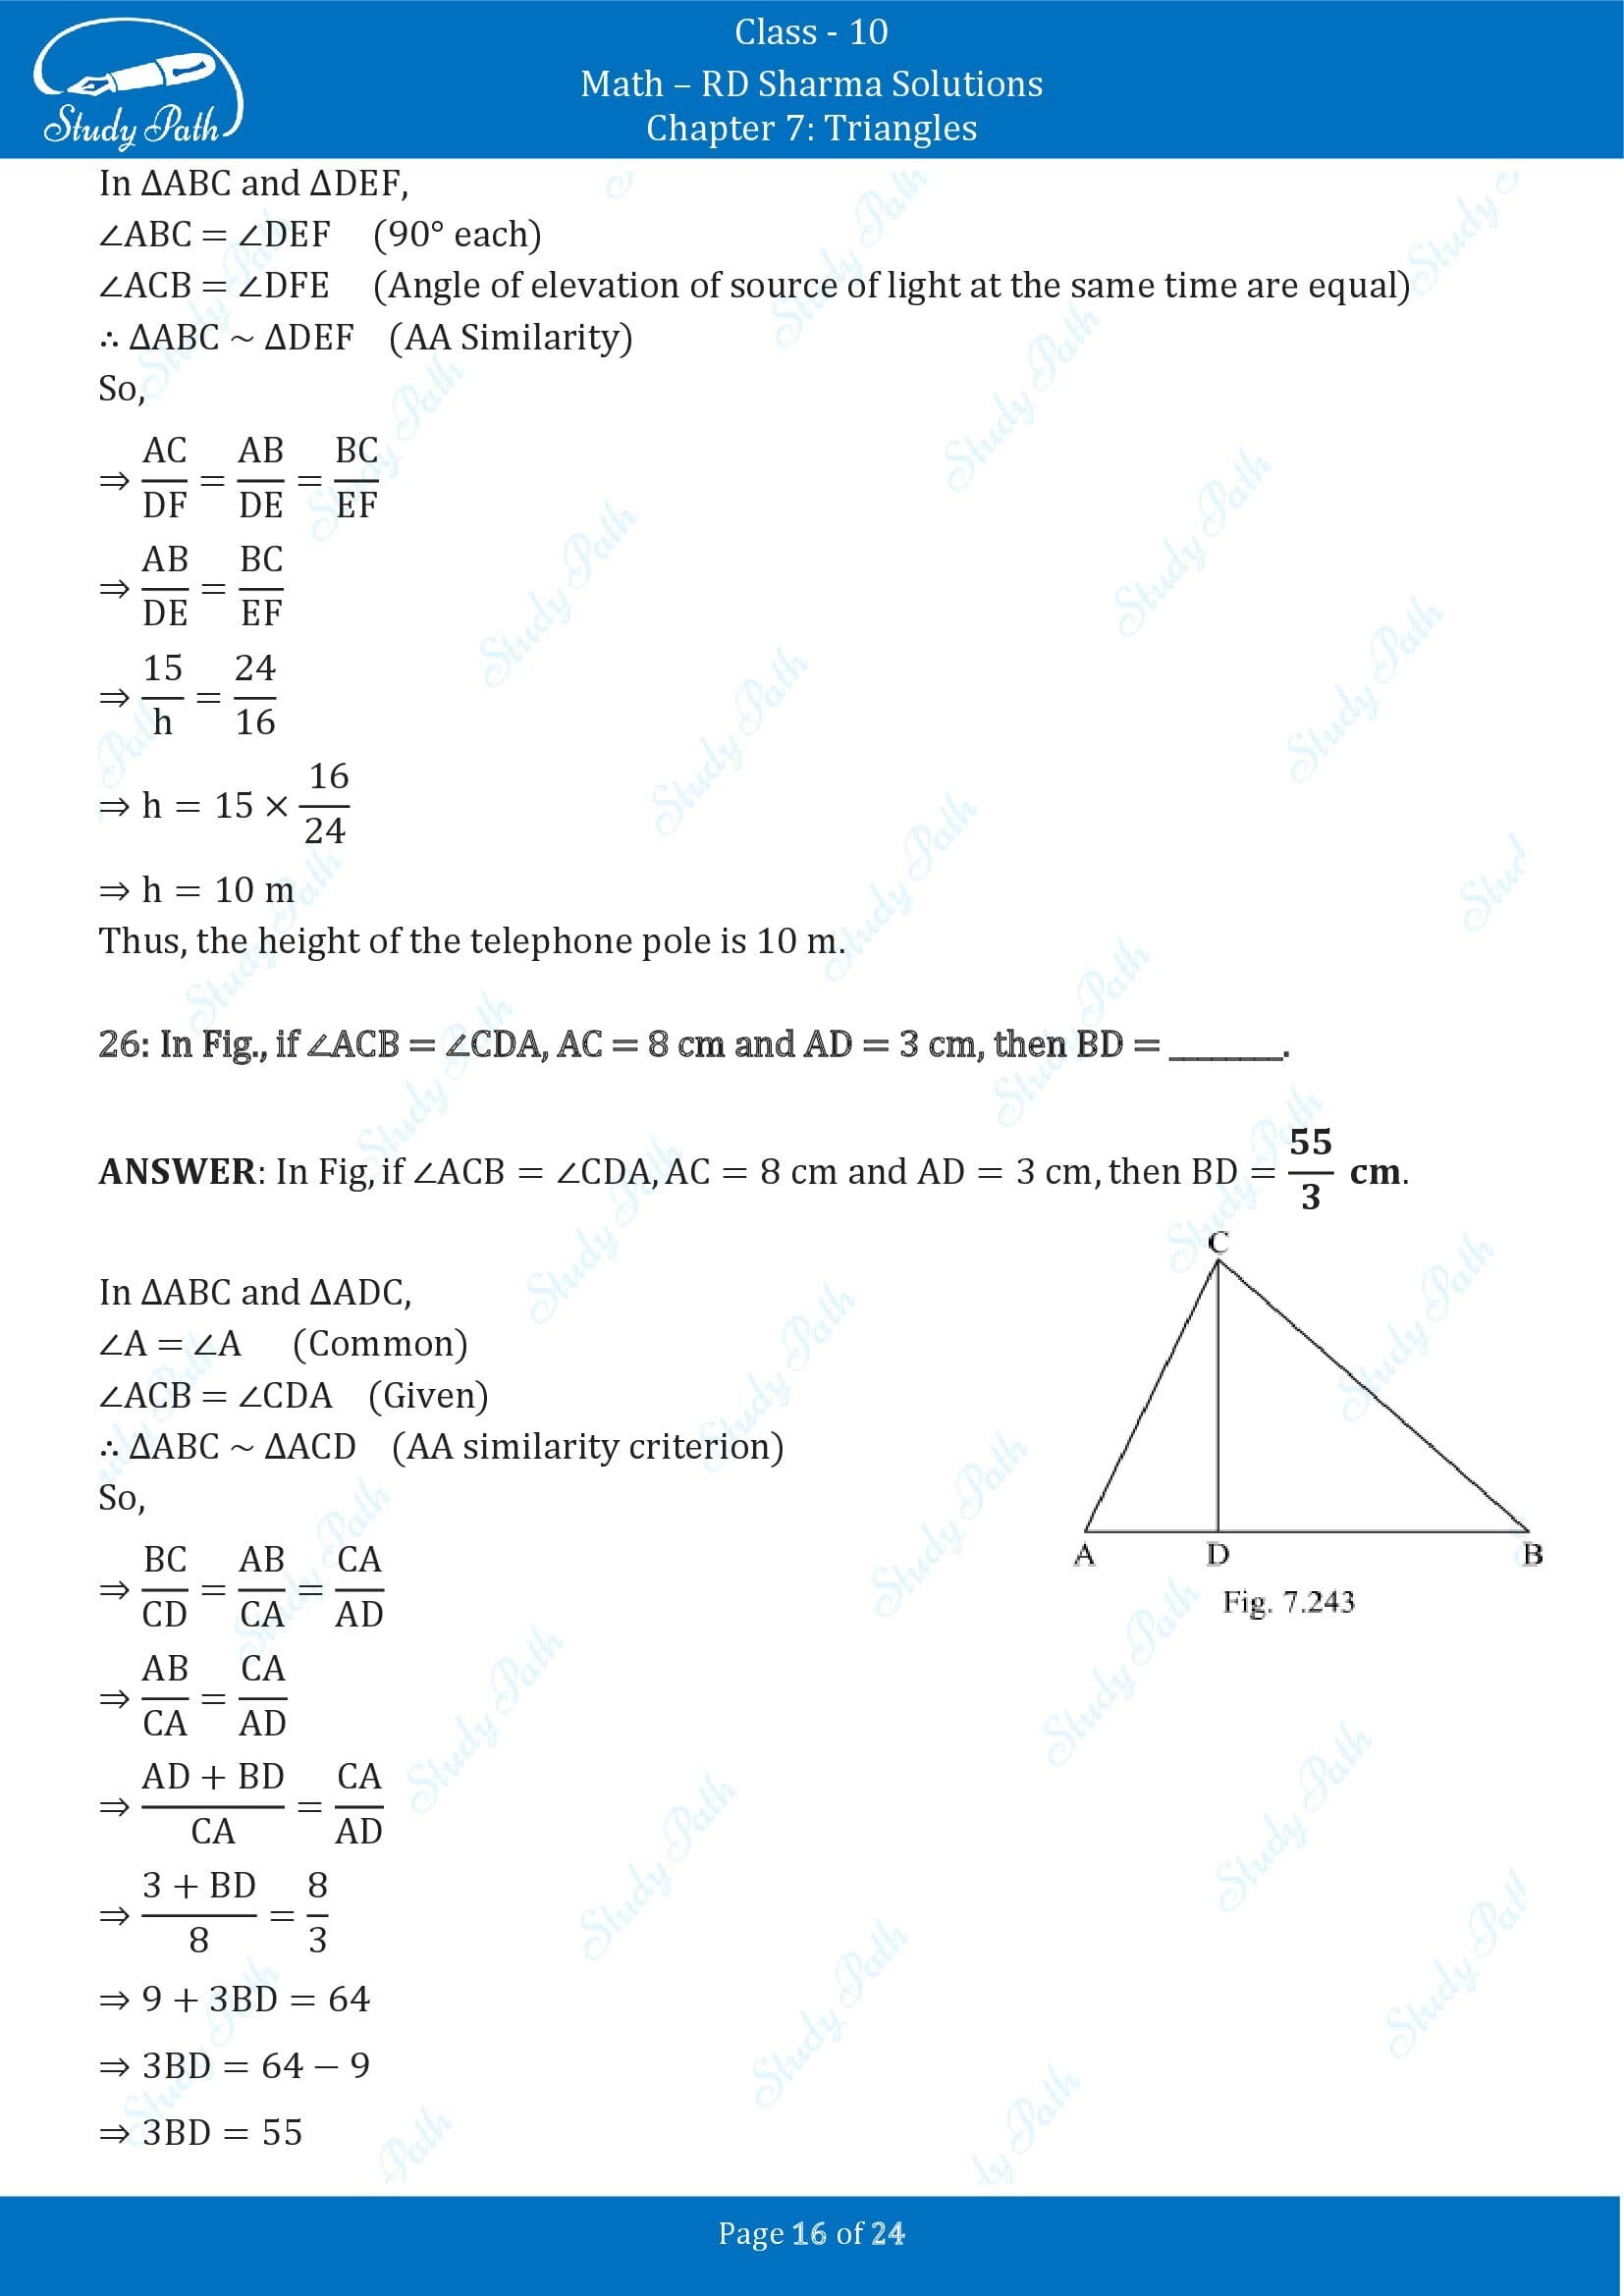 RD Sharma Solutions Class 10 Chapter 7 Triangles Fill in the Blank Type Questions FBQs 00016